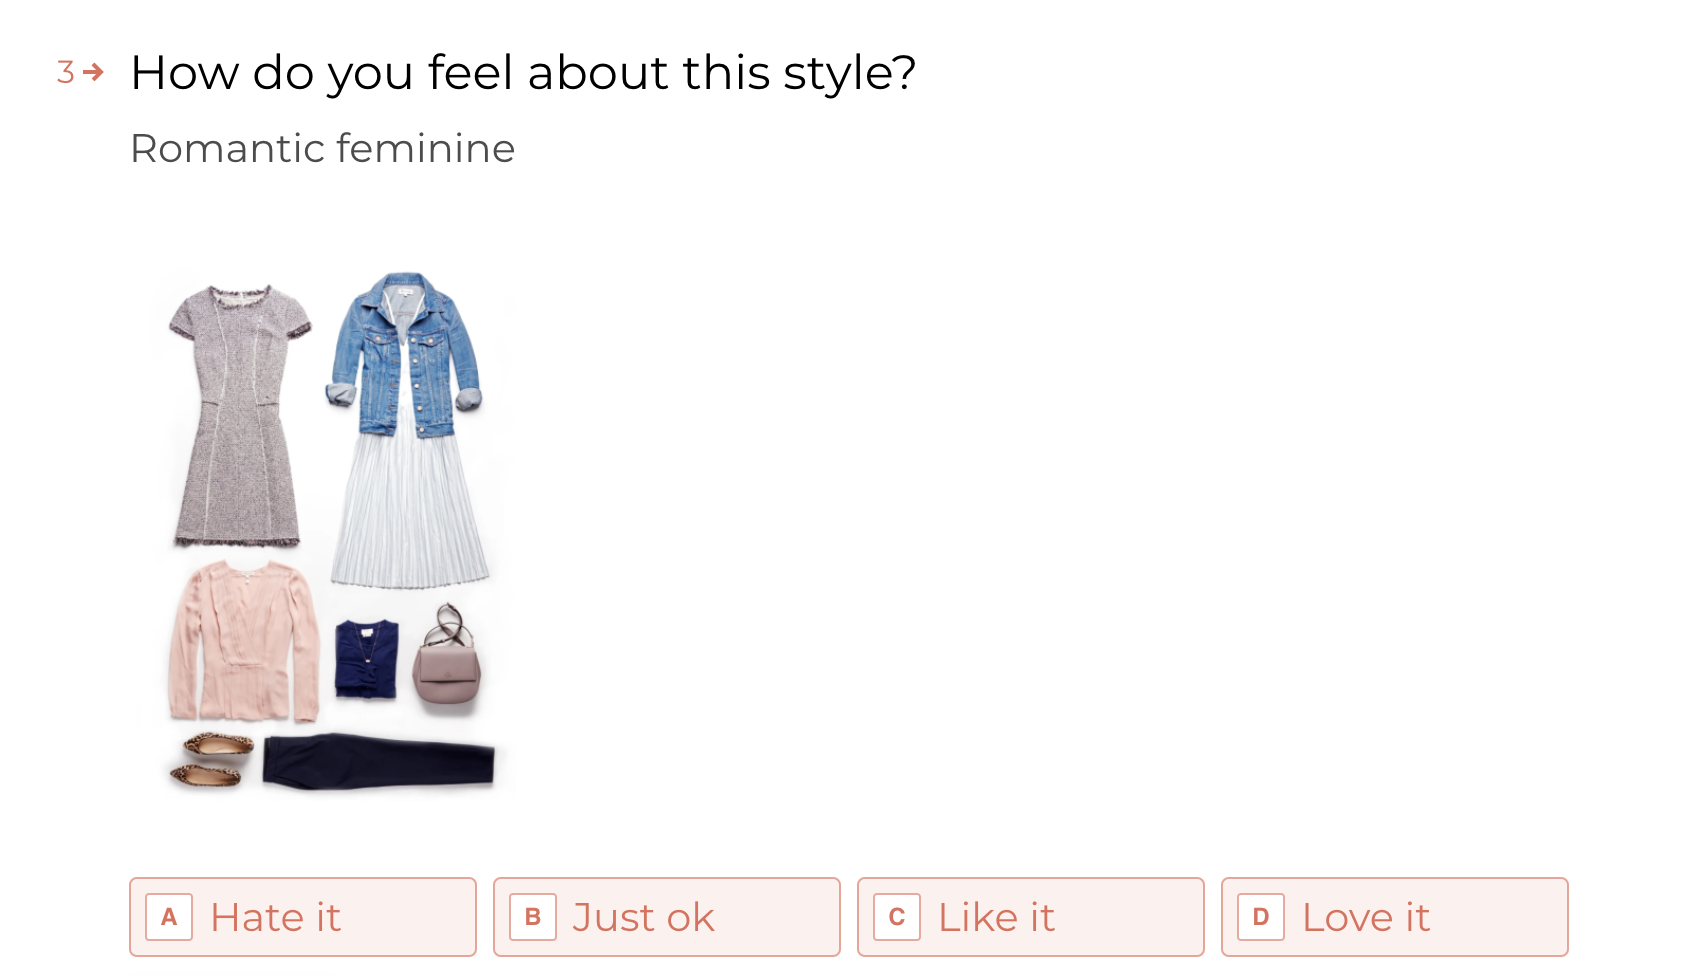 A picture of clothes with the question &quot;How do you feel about this style?&quot; and multiple answer choices